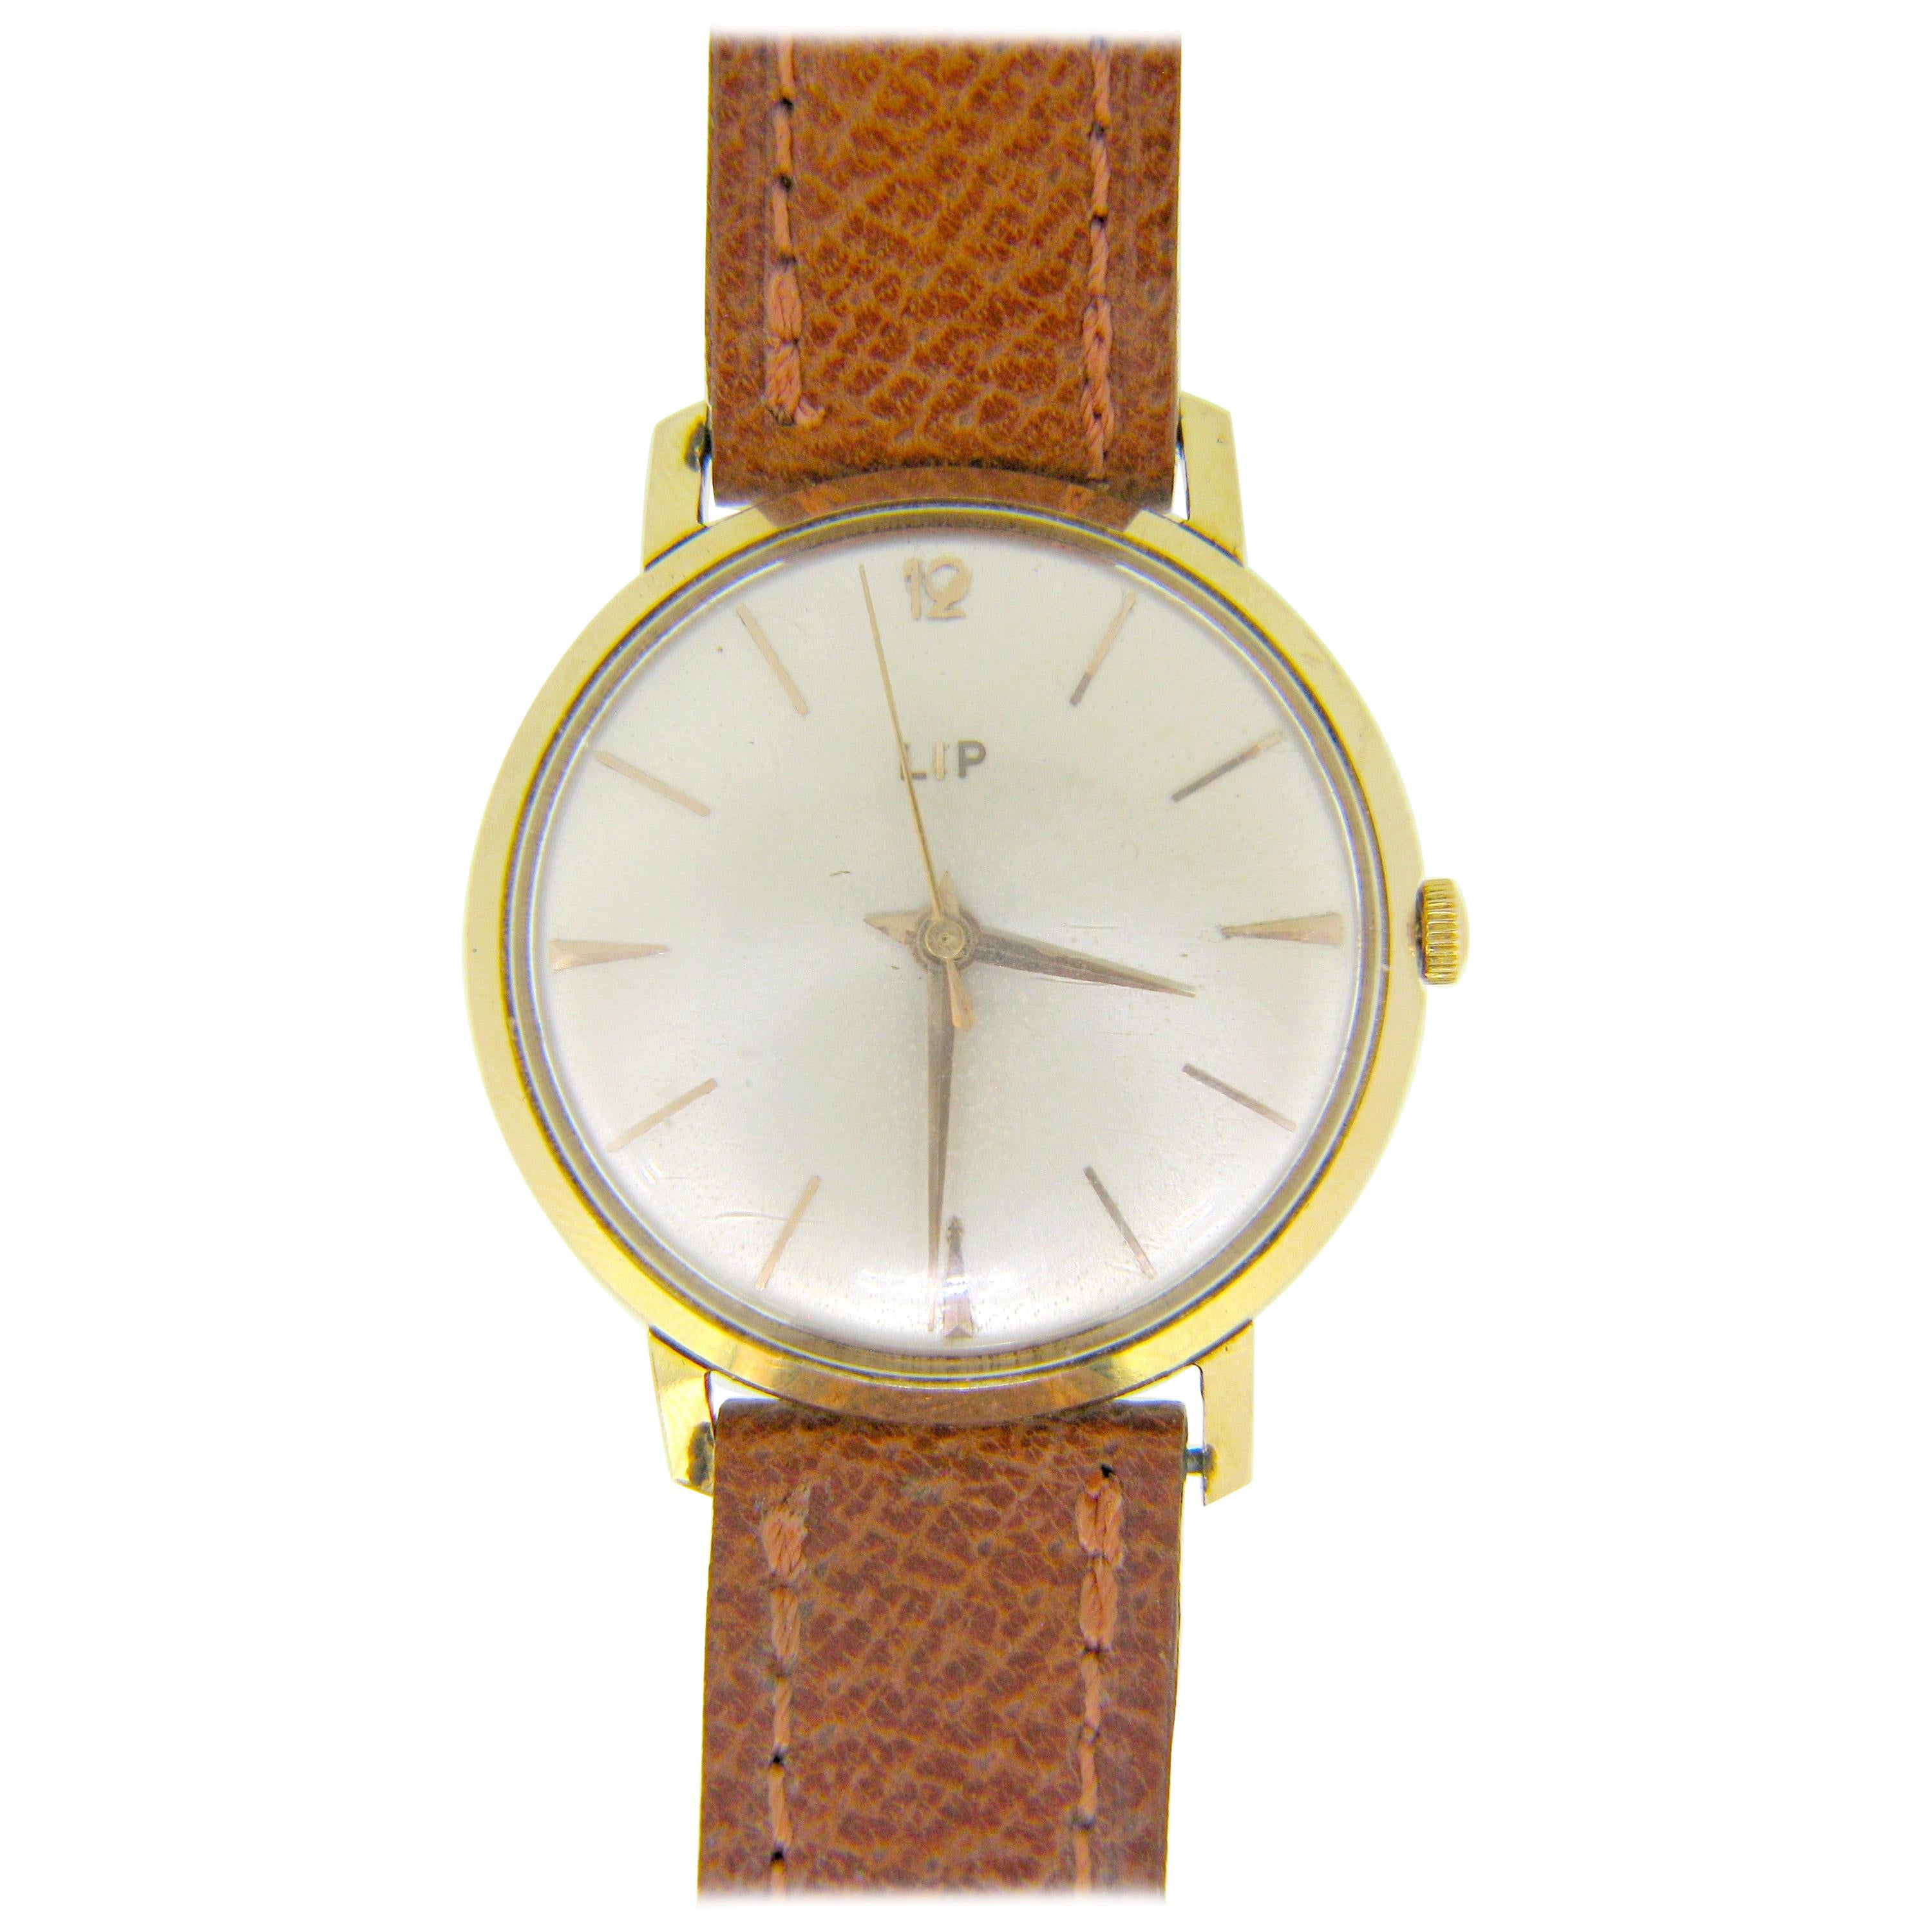 Vintage 1960s Lip Yellow Rose Gold Manual Wind Watch